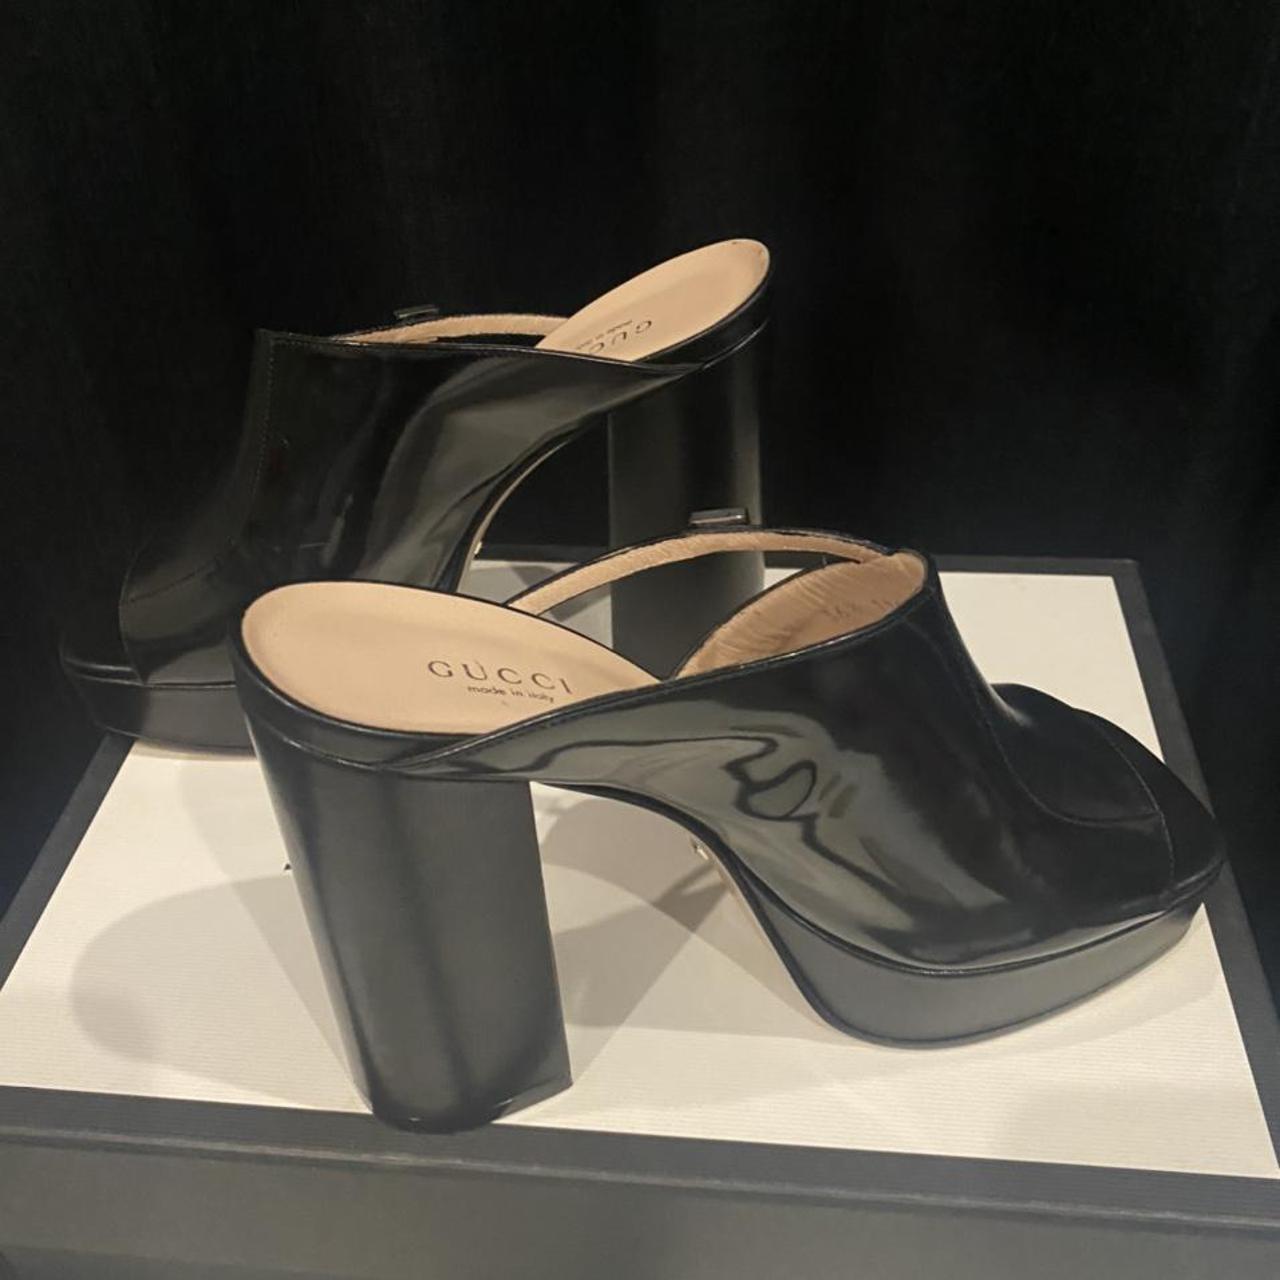 Product Image 3 - Authentic Gucci platforms in UK